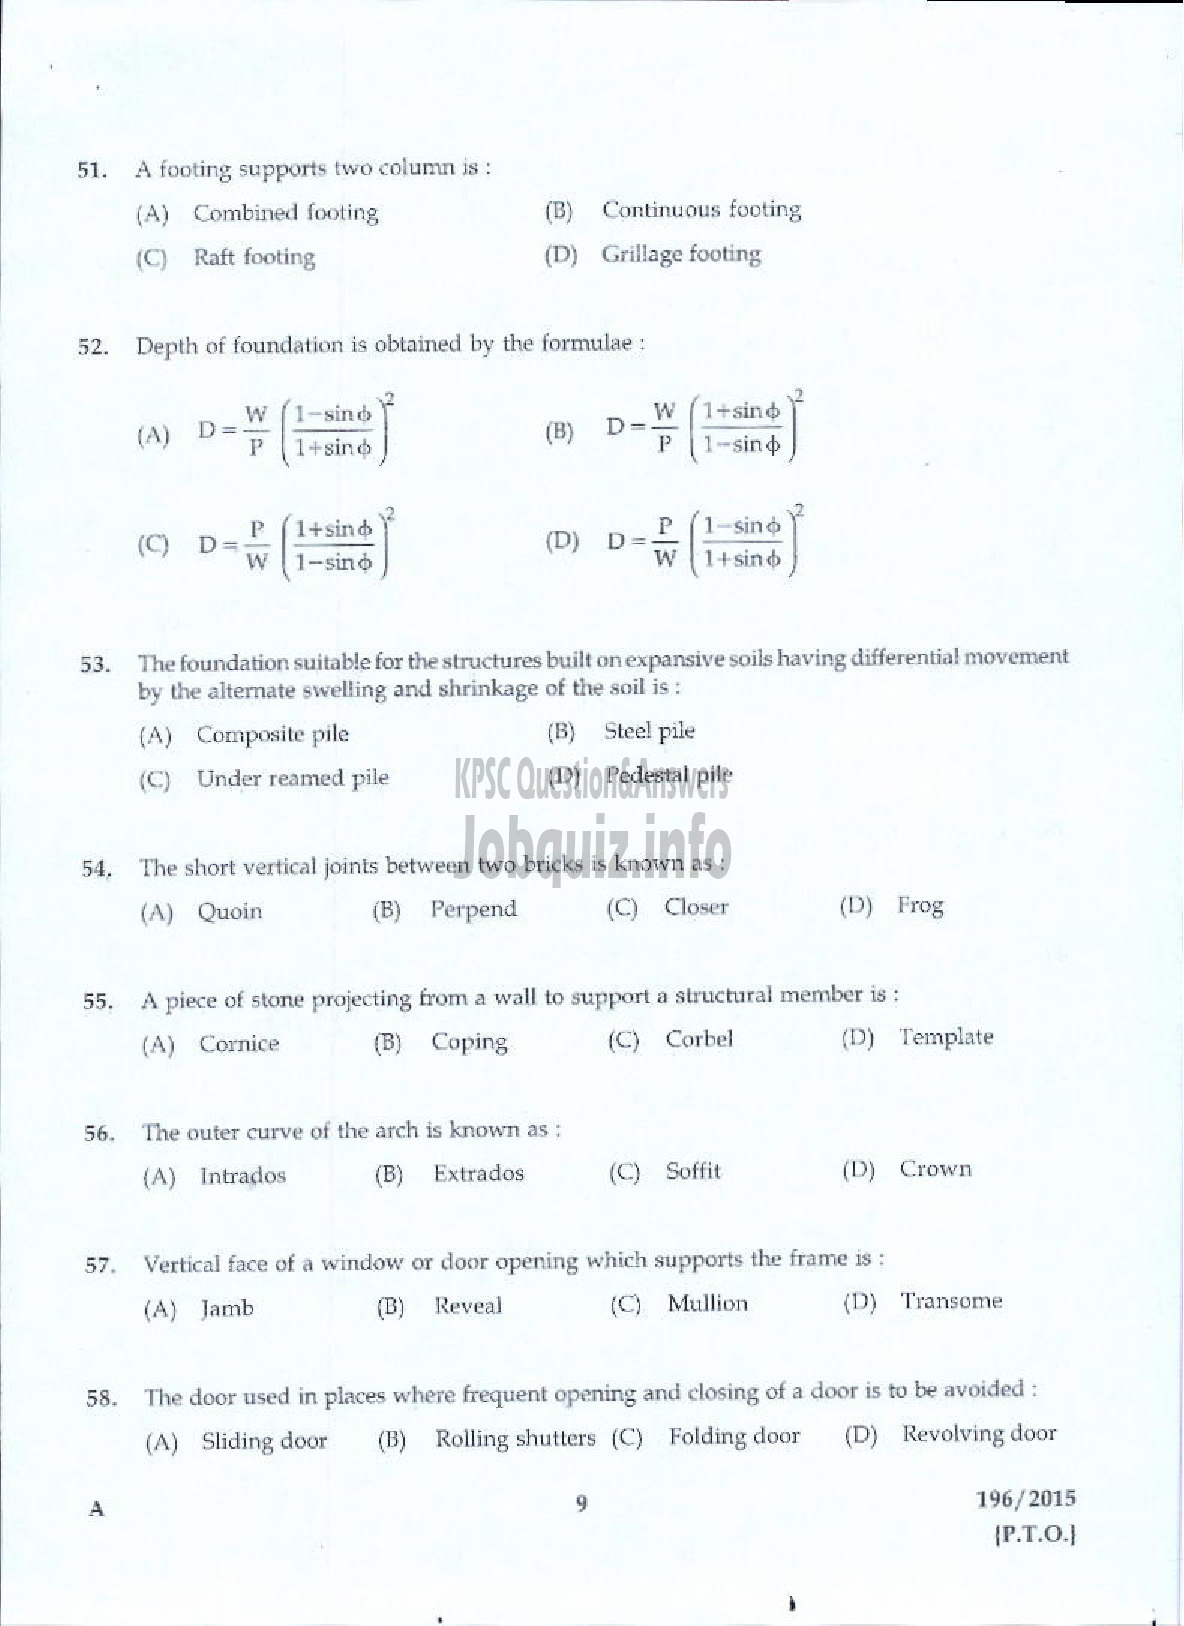 Kerala PSC Question Paper - DRAFTSMAN GR I/ TOWN PLANNING SURVEYOR GR I TOWN AND COUNTRY PLANNING-7